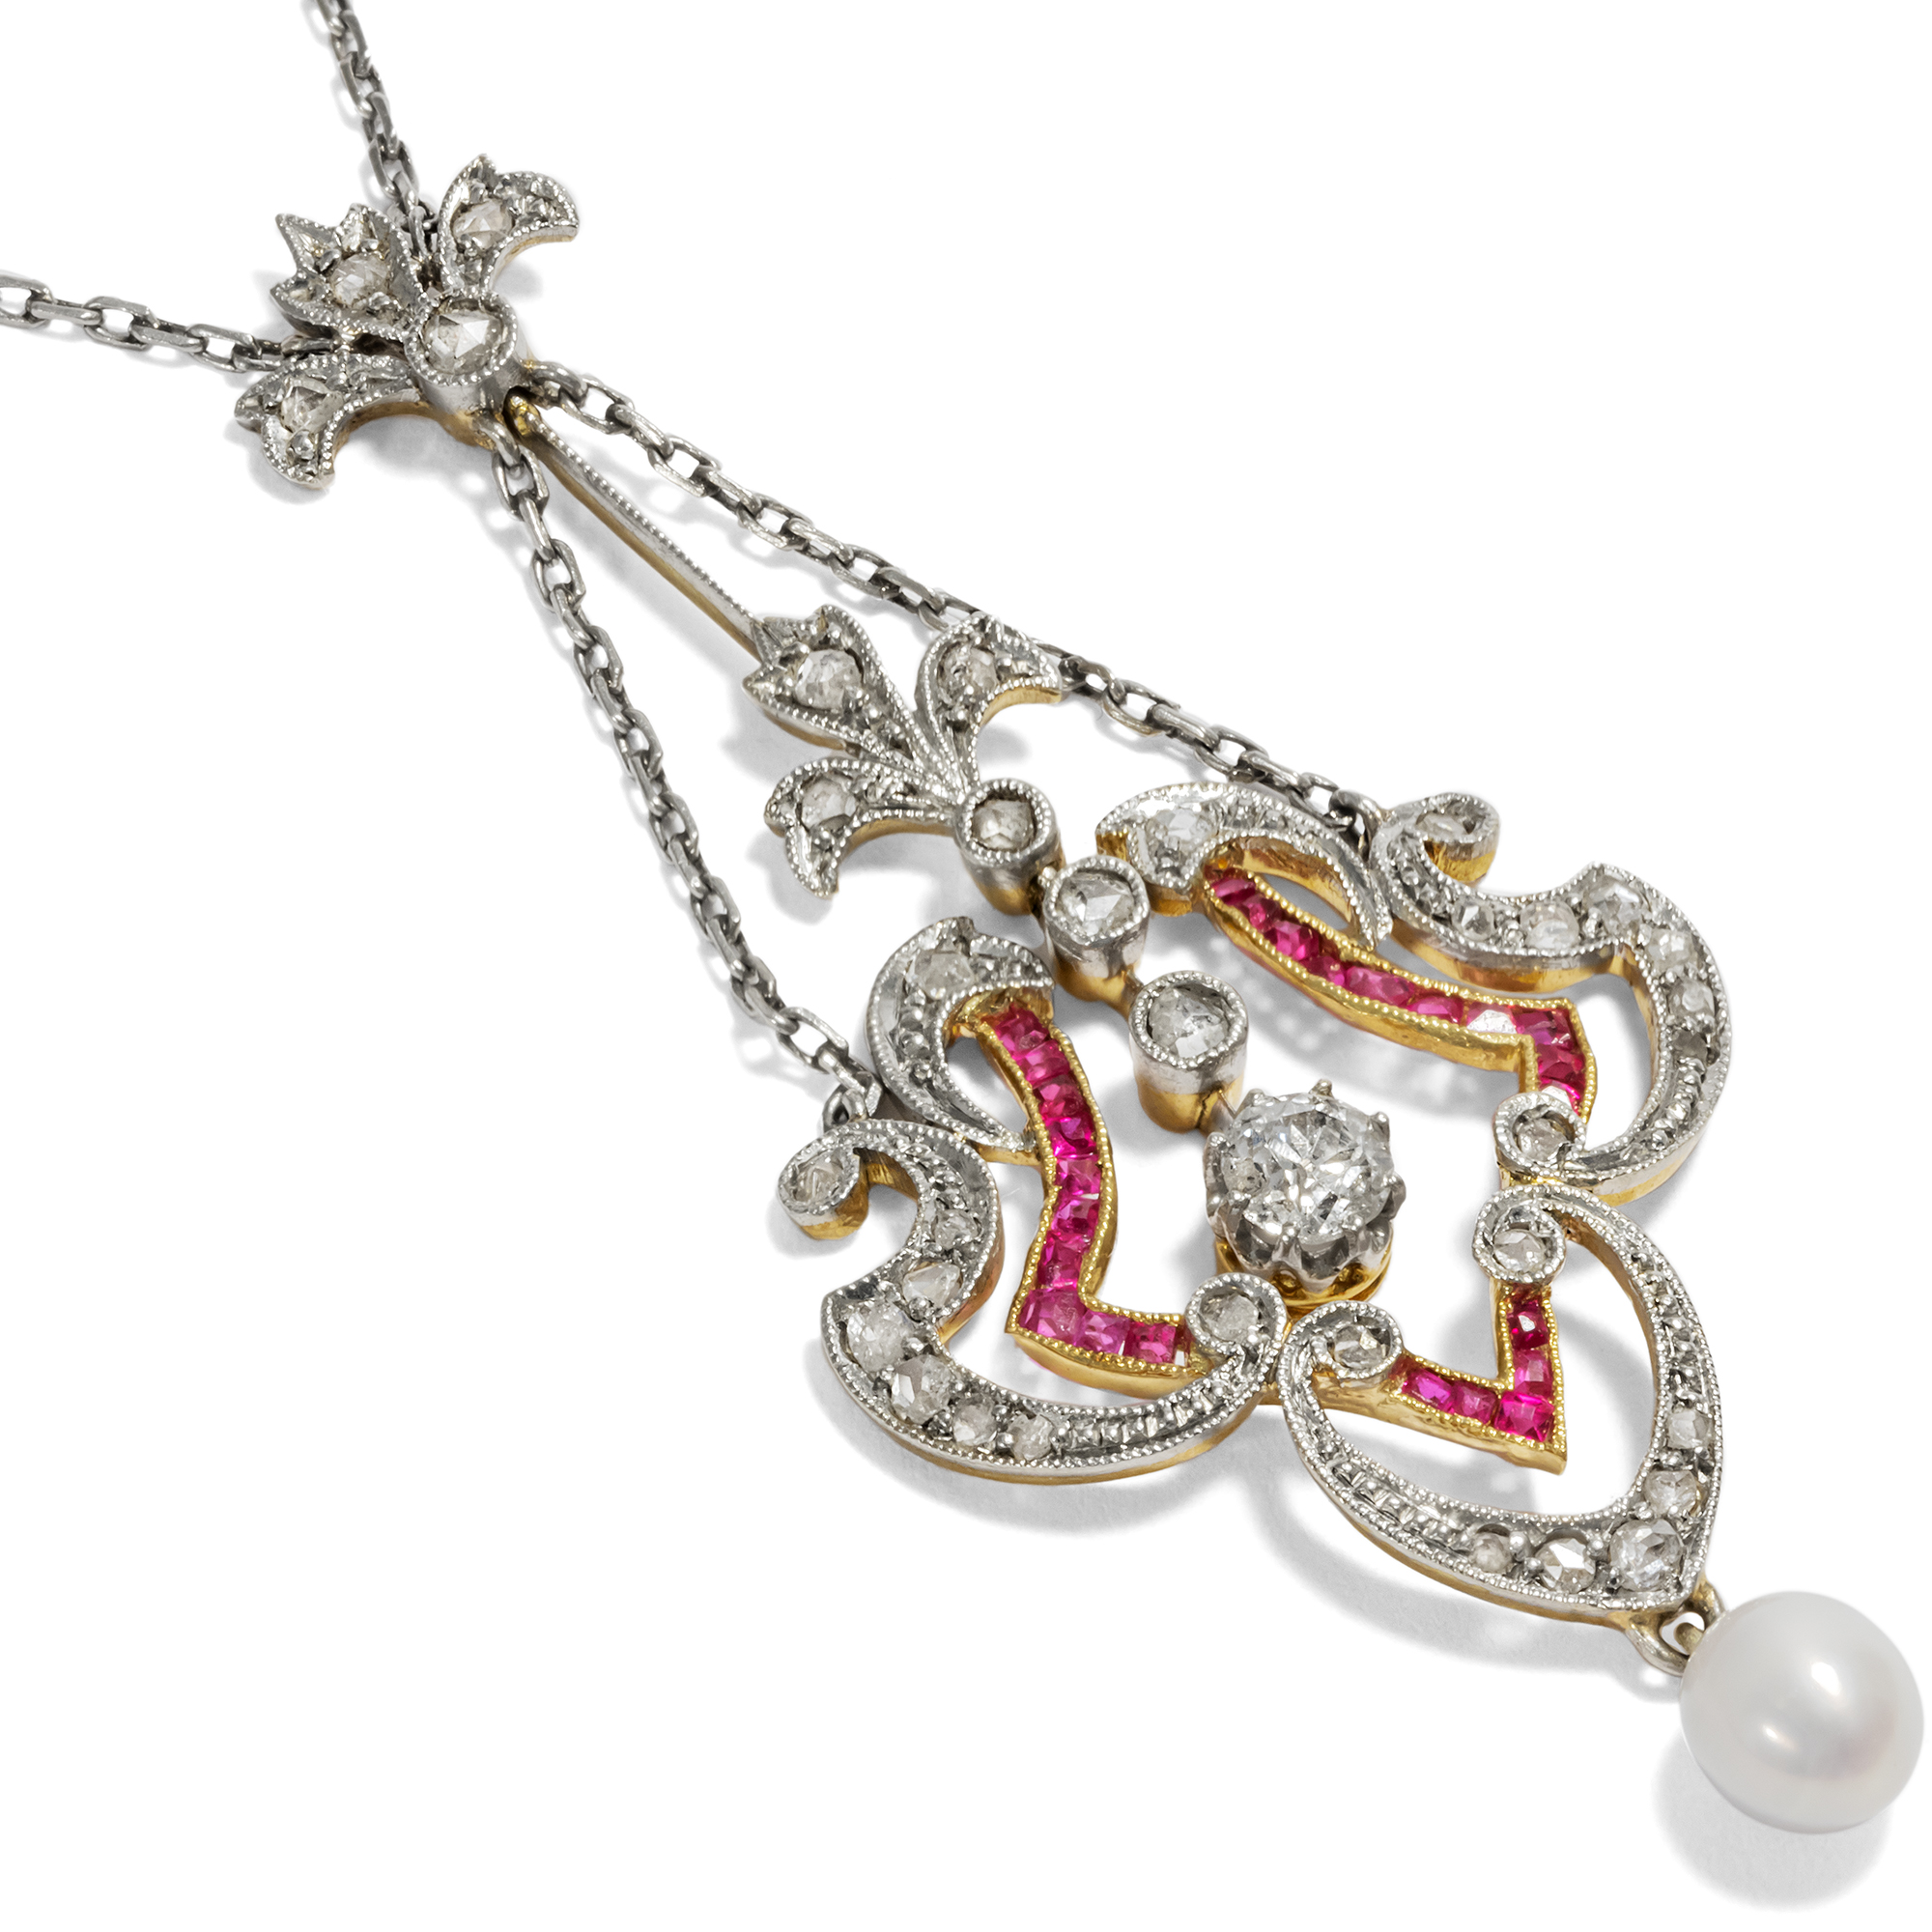 Delicate Necklace with Diamonds, Rubies & Natural Pearl, circa 1910